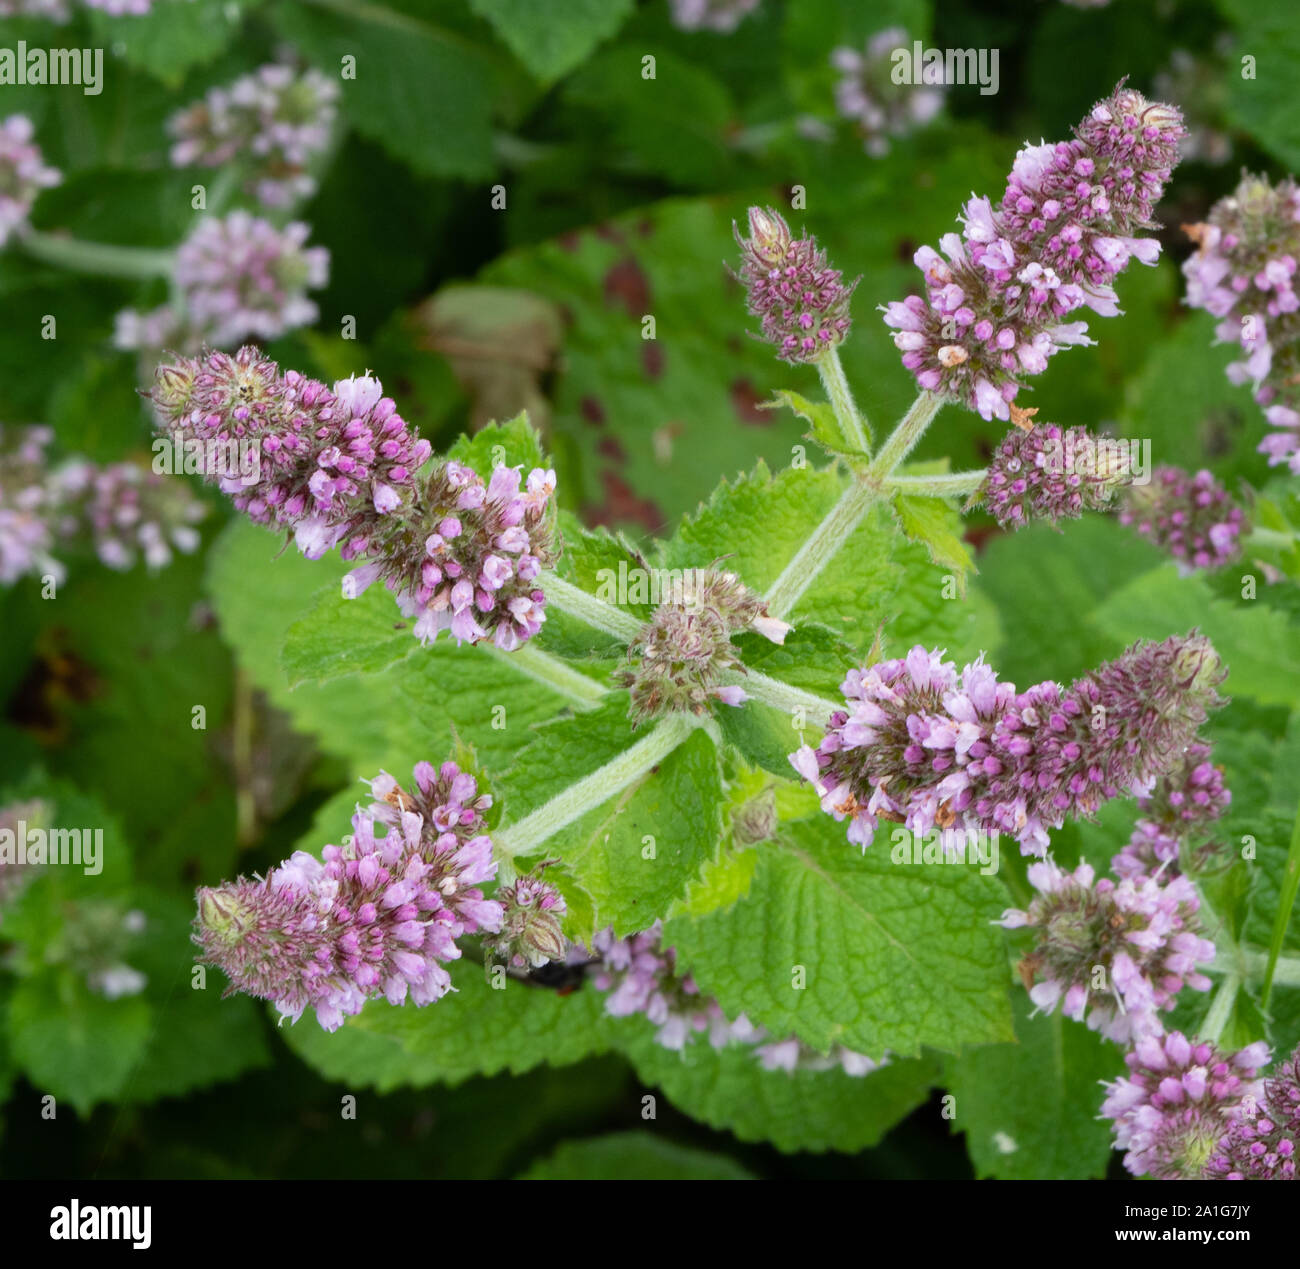 Round-leaved or apple-scented mint Mentha rotundifolia (suaveolens) with branched flower spikes growing wild on damp ground in a Derbyshire quarry UK Stock Photo